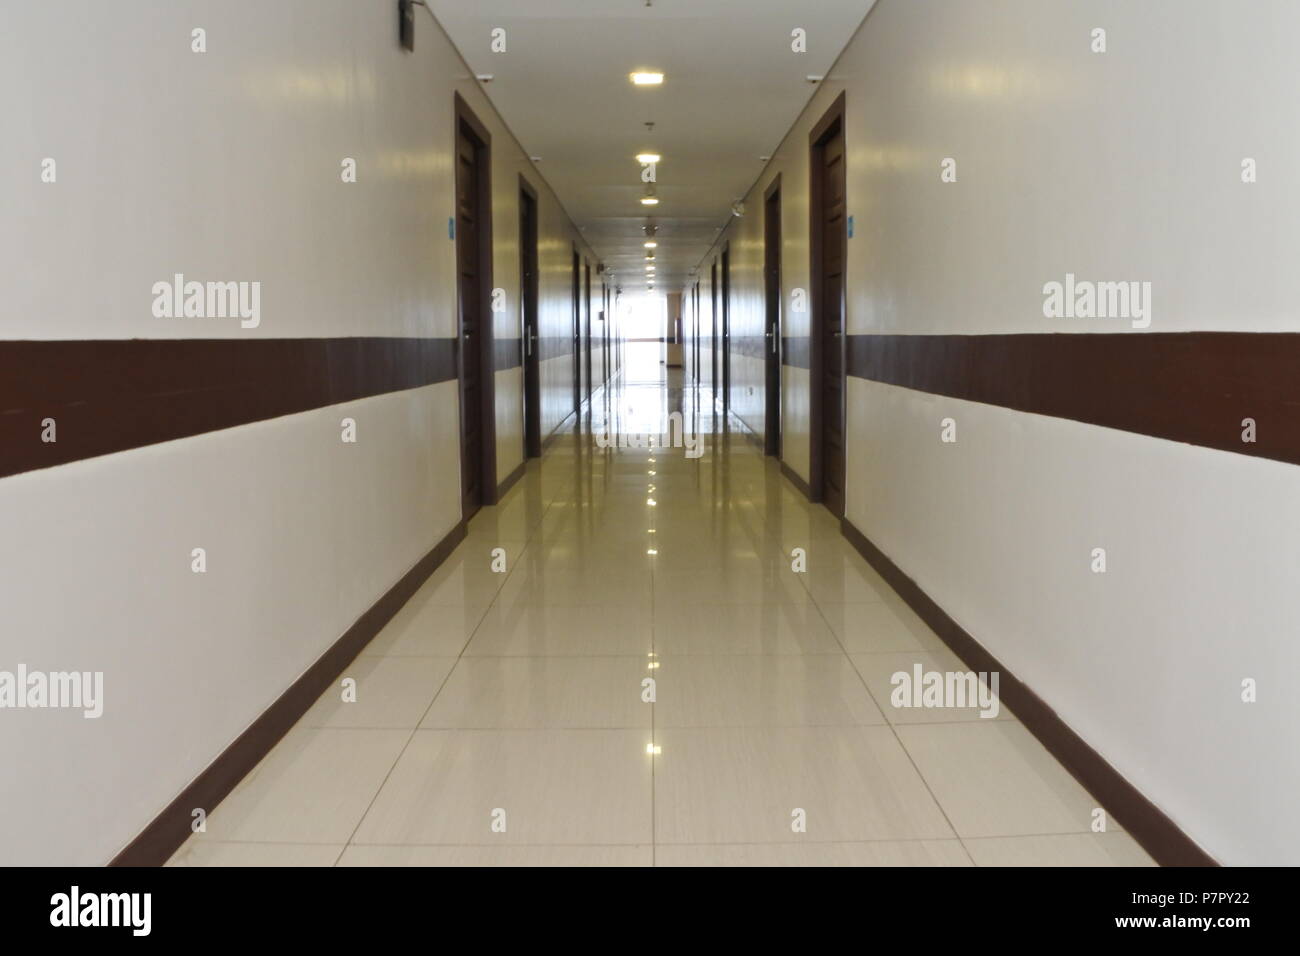 A symmetrical shot featuring rooms on both sides, leading to an open end bathed in abundant natural light. Stock Photo